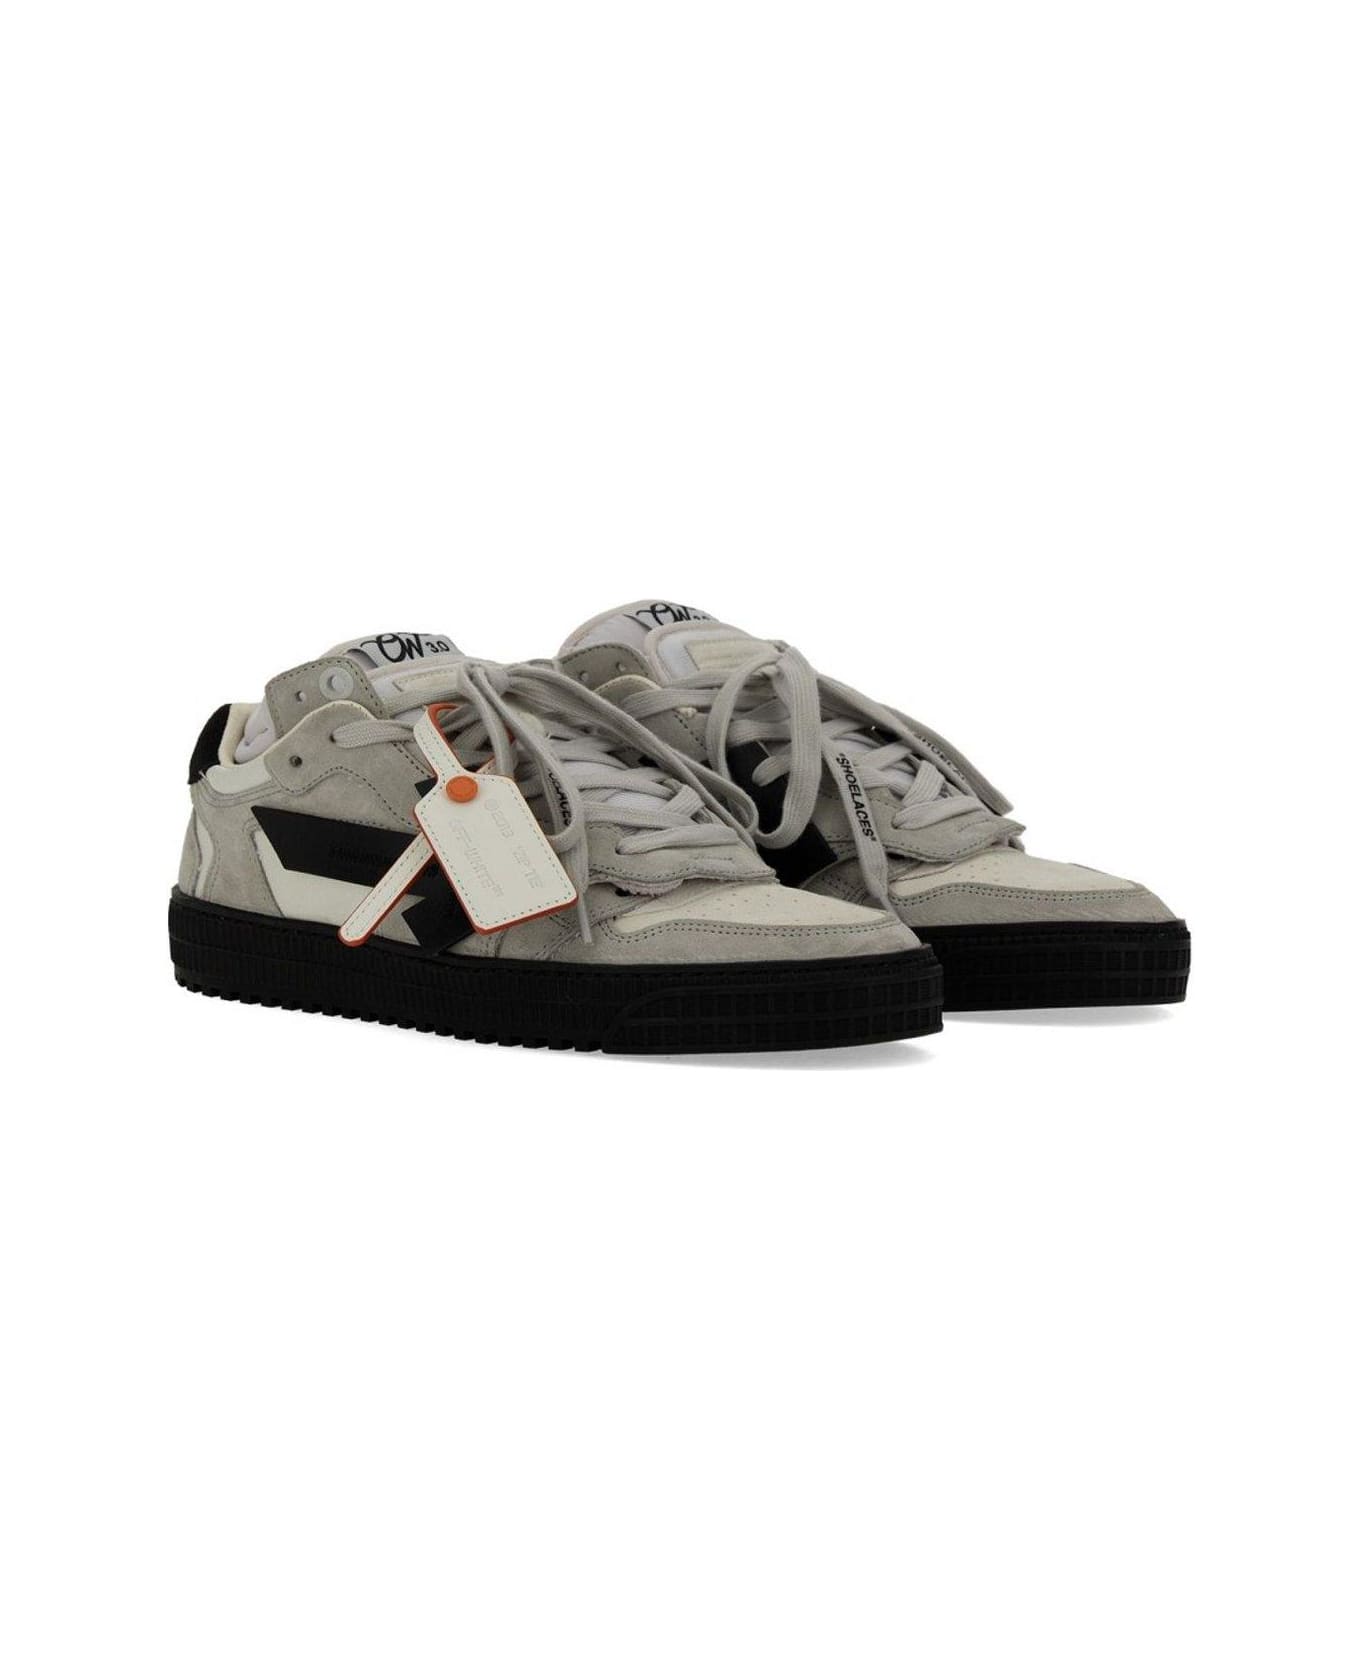 Off-White Floating Arrow Lace-up Sneakers - GREY/WHITE